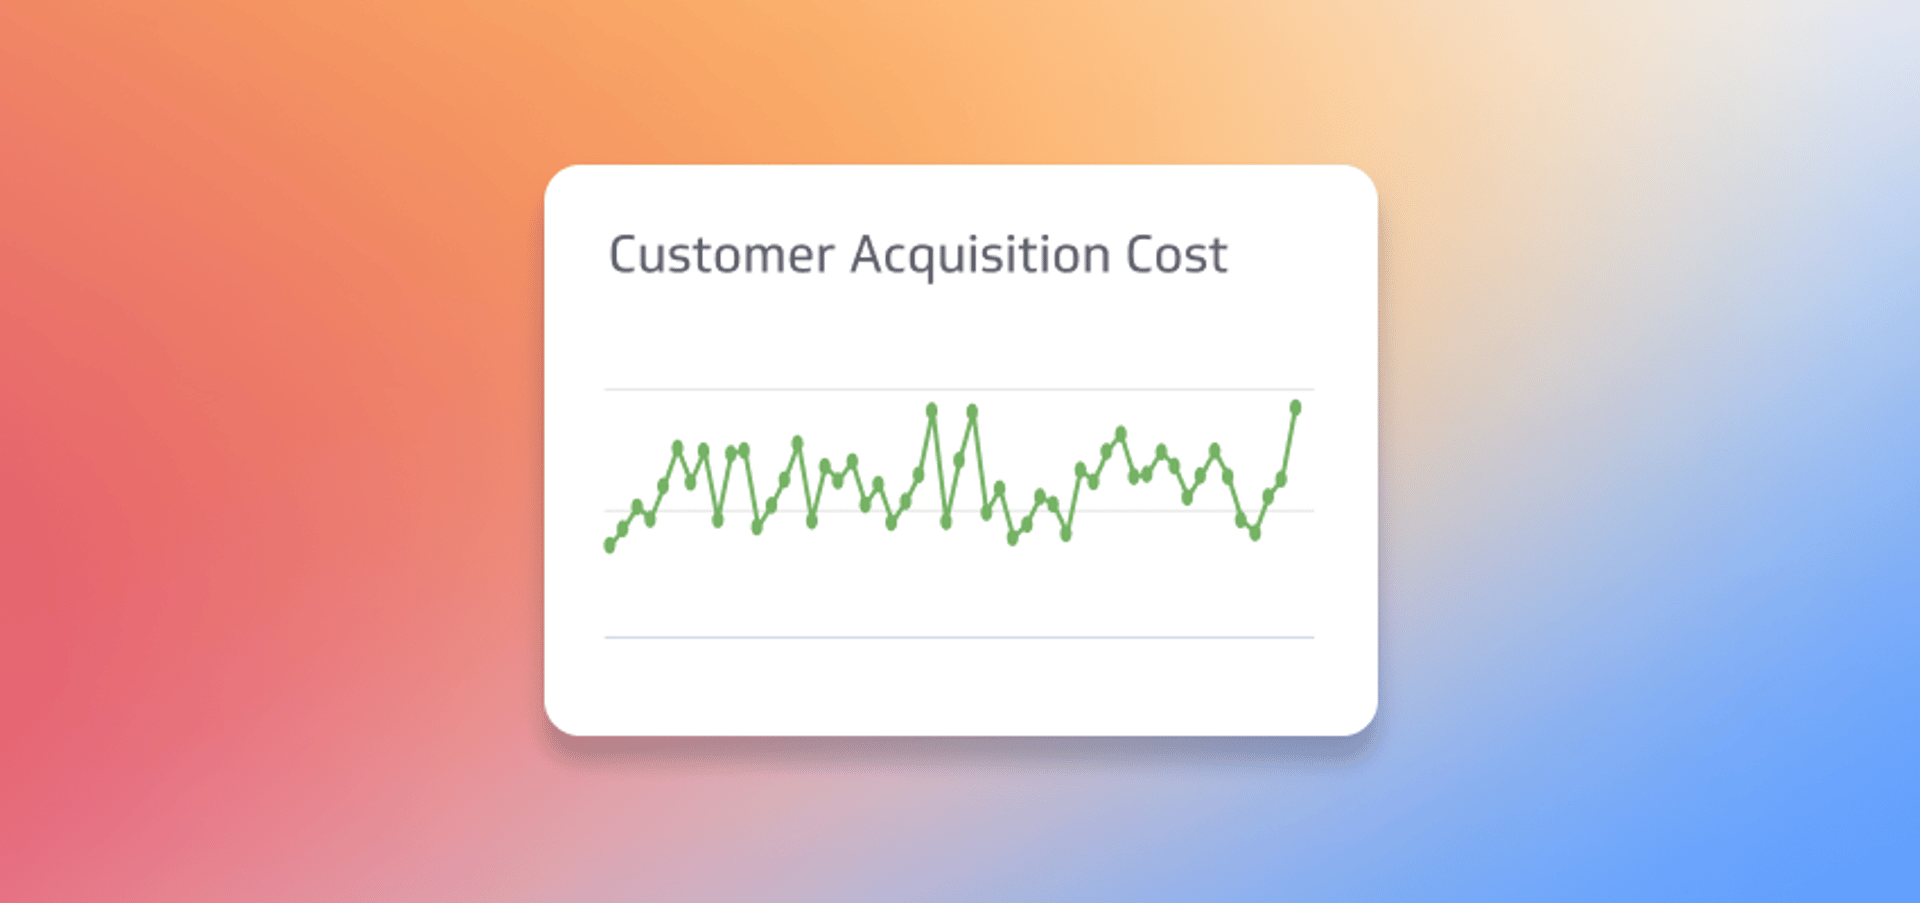 Top Marketing Kpis Customer Acquisition Cost Cac